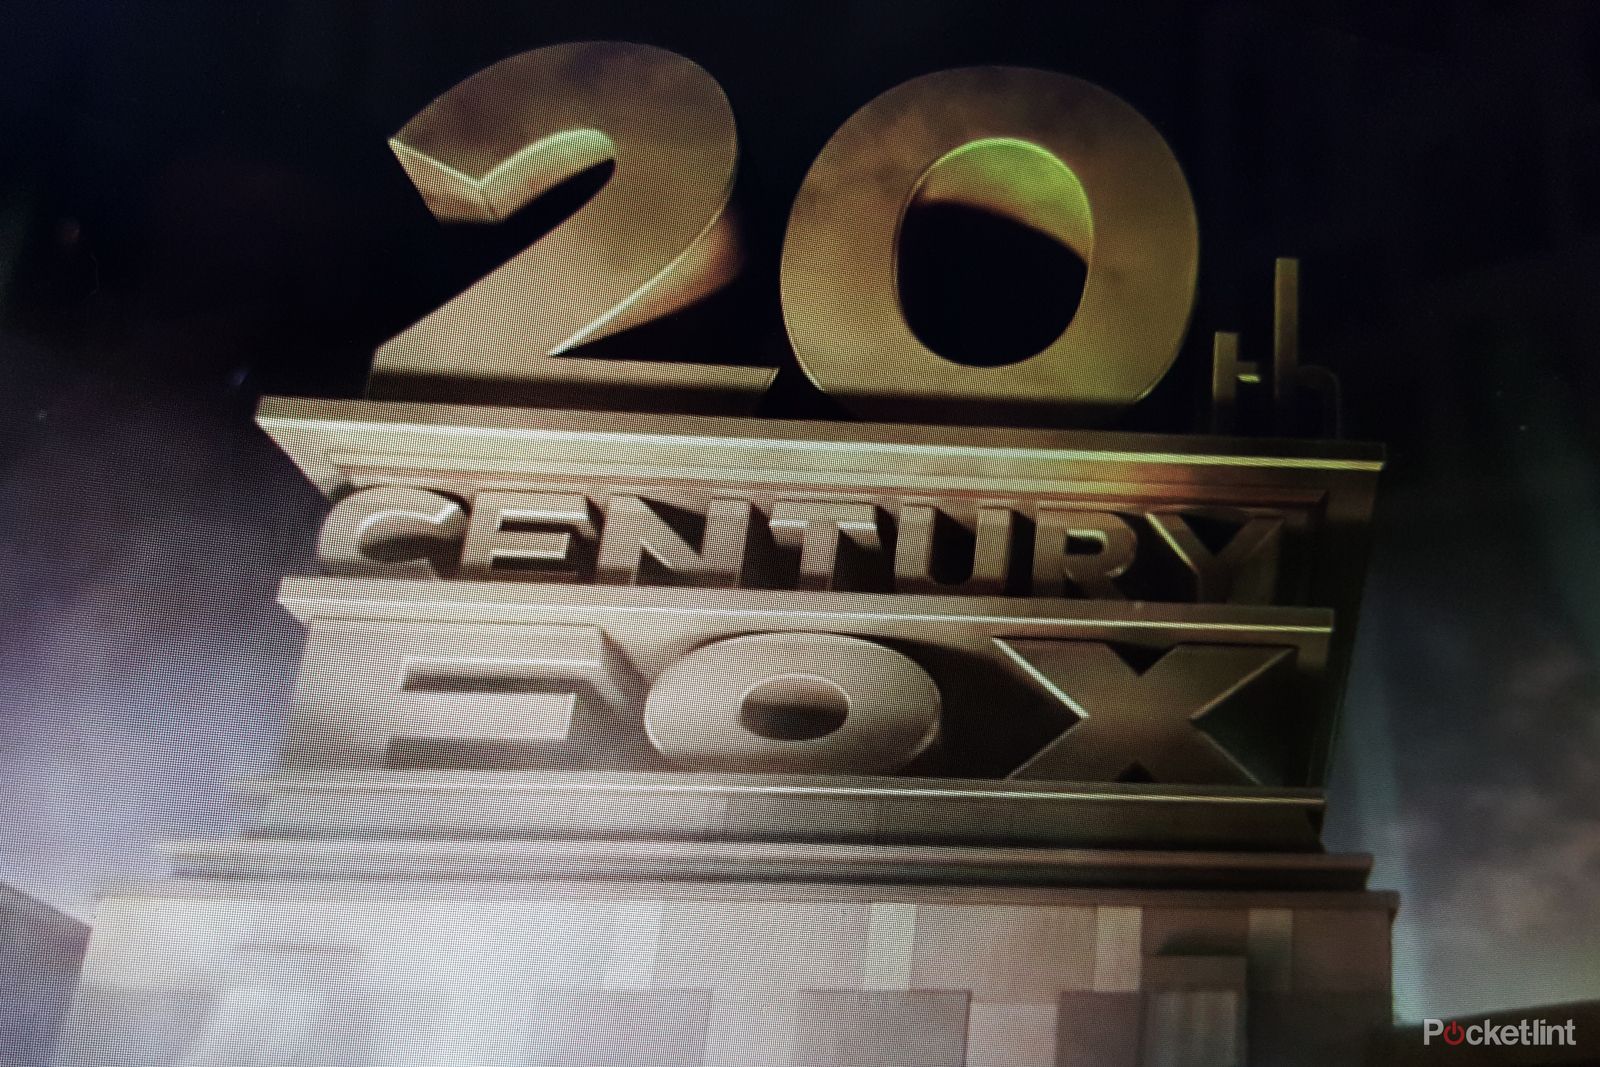 20th century fox uhd and hdr home viewing for all new movies image 1